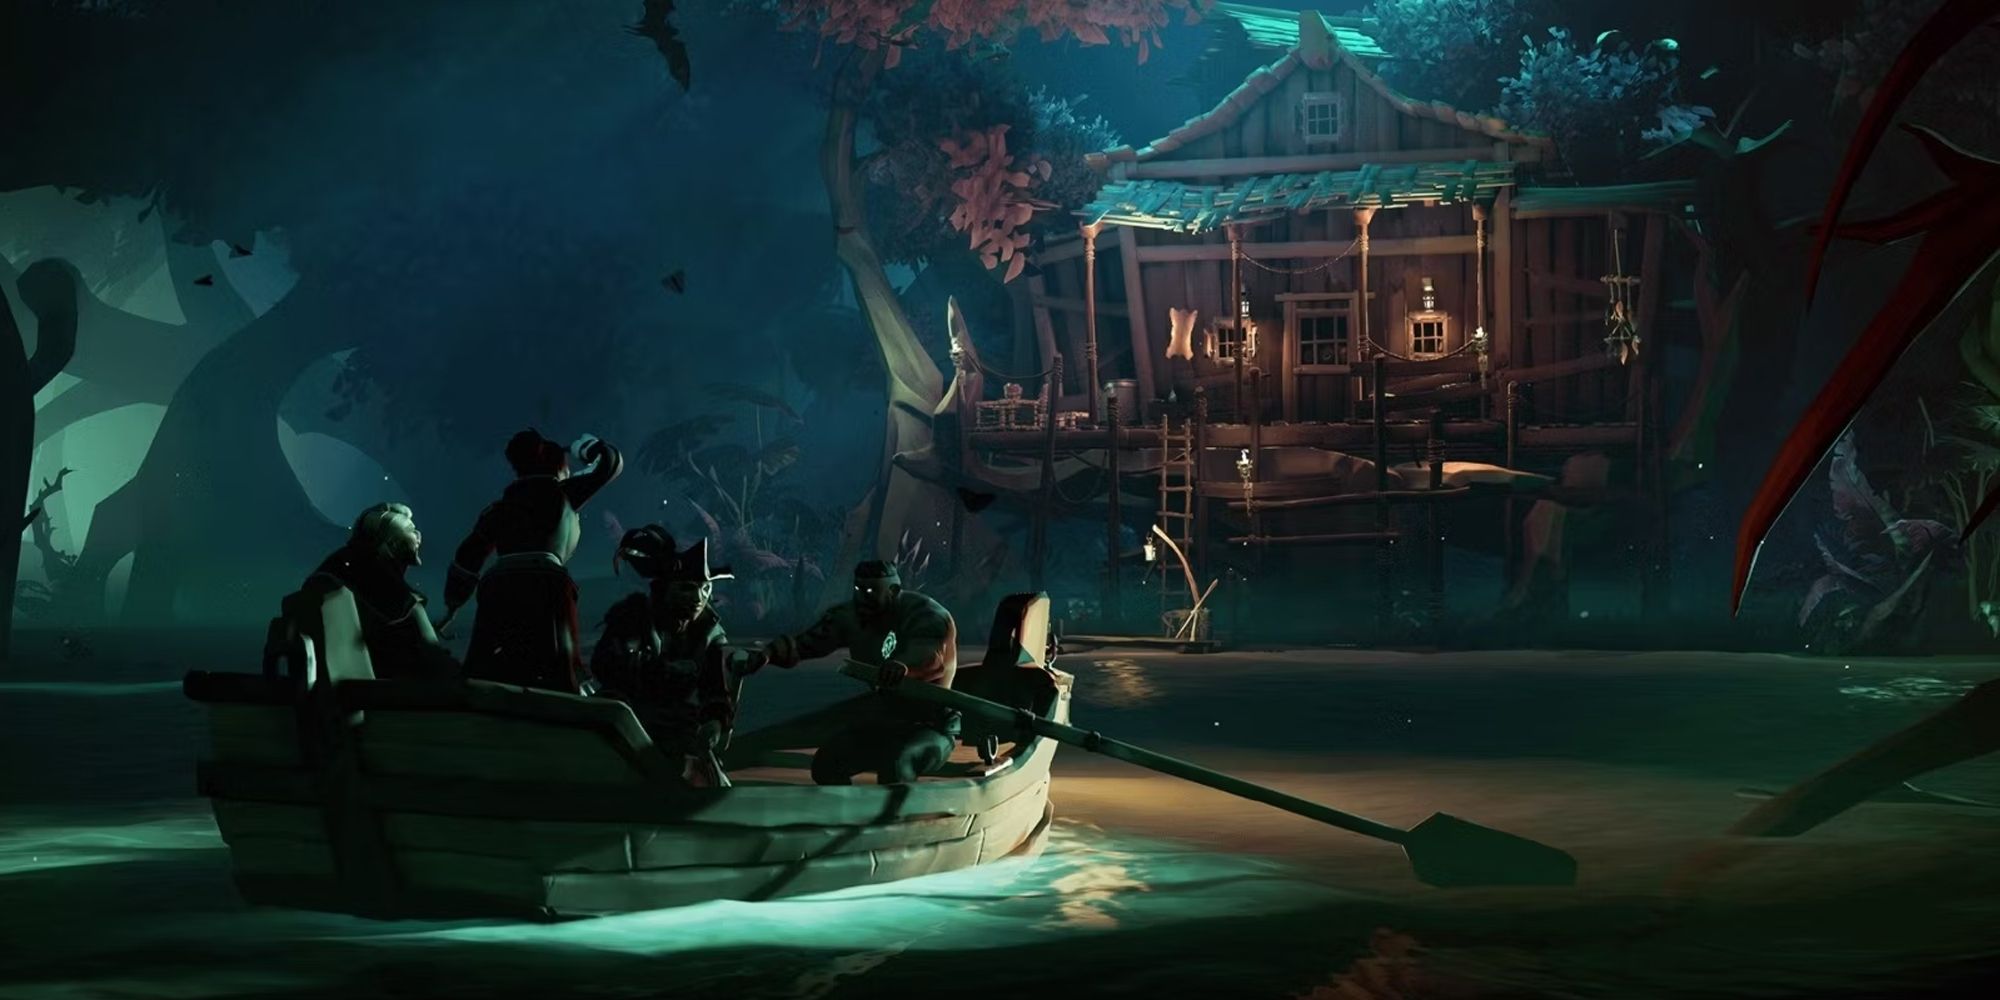 Pirates in a dark forest, rowing towards a cabin.